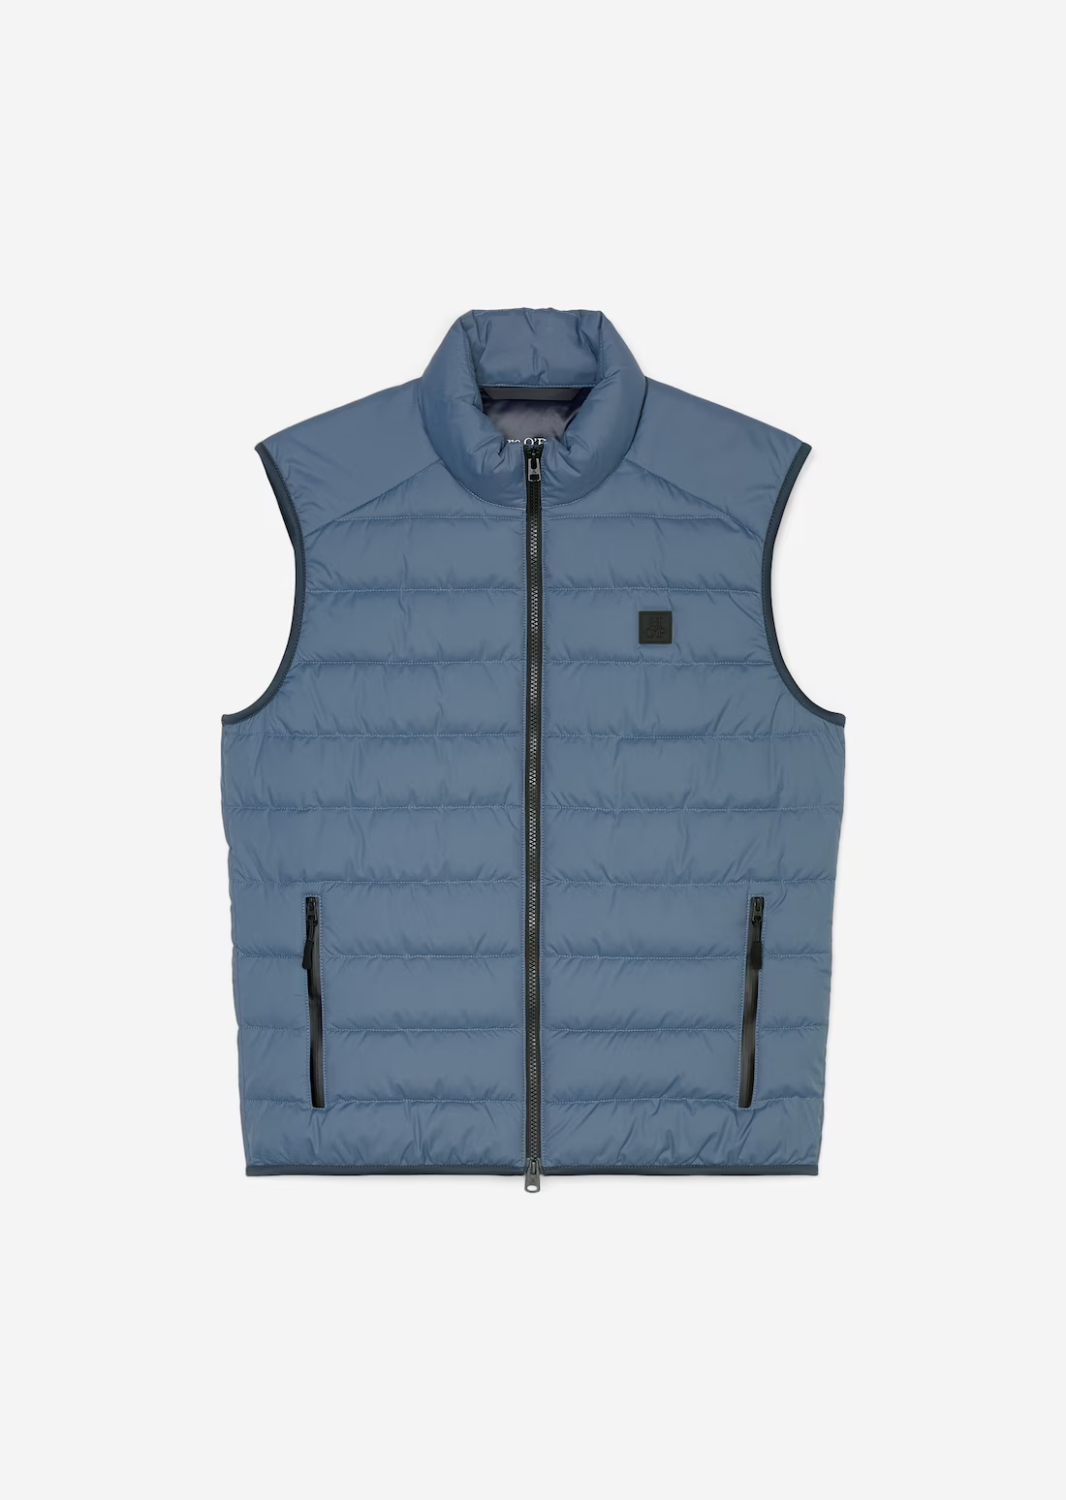 Marco Polo Vest Stand-up Collar